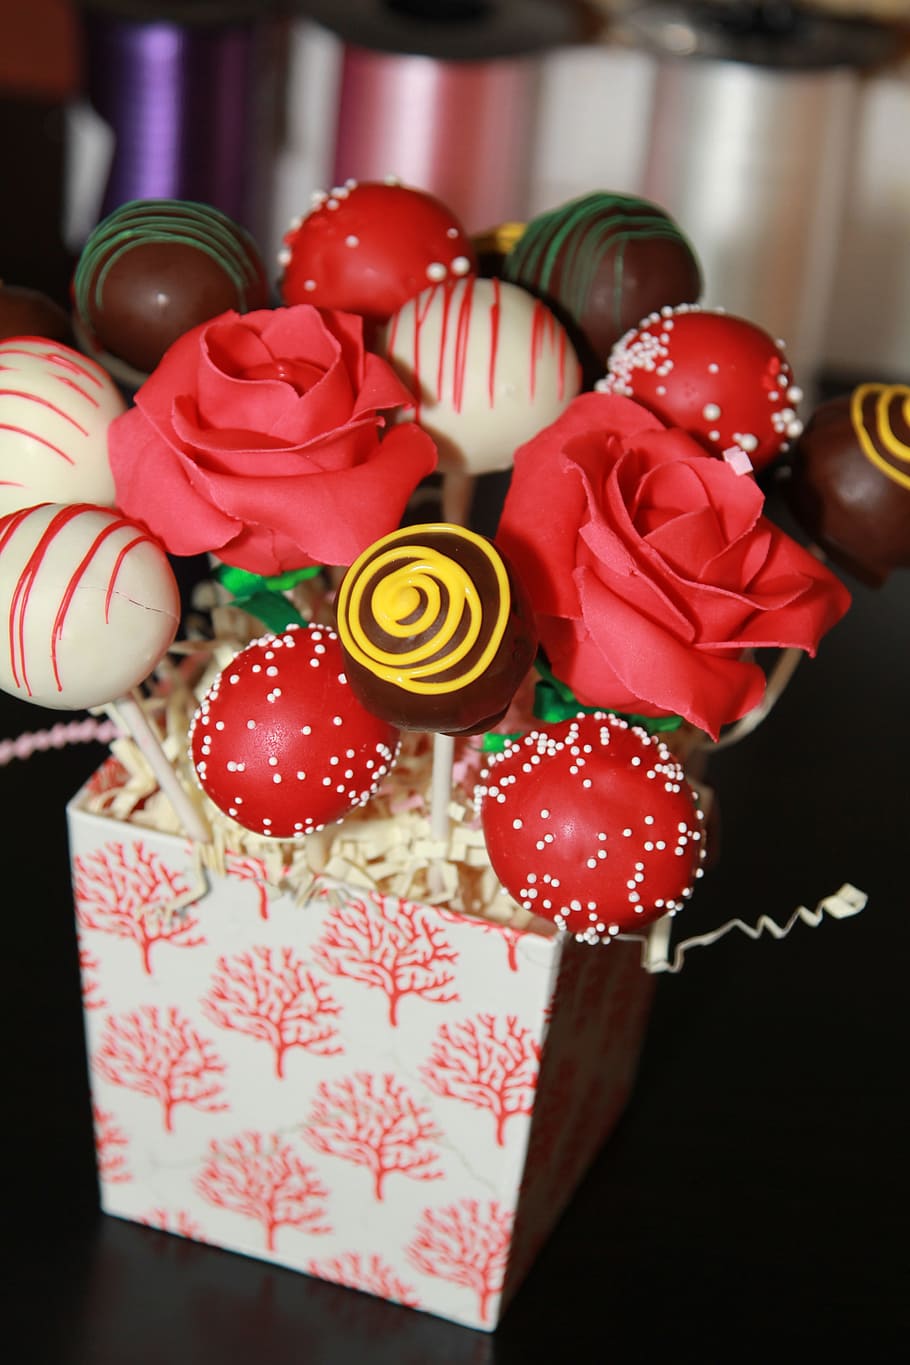 red, artificial, rose, flowers, chocolate, strawberry, vanilla, cake pops, bouquet, gift